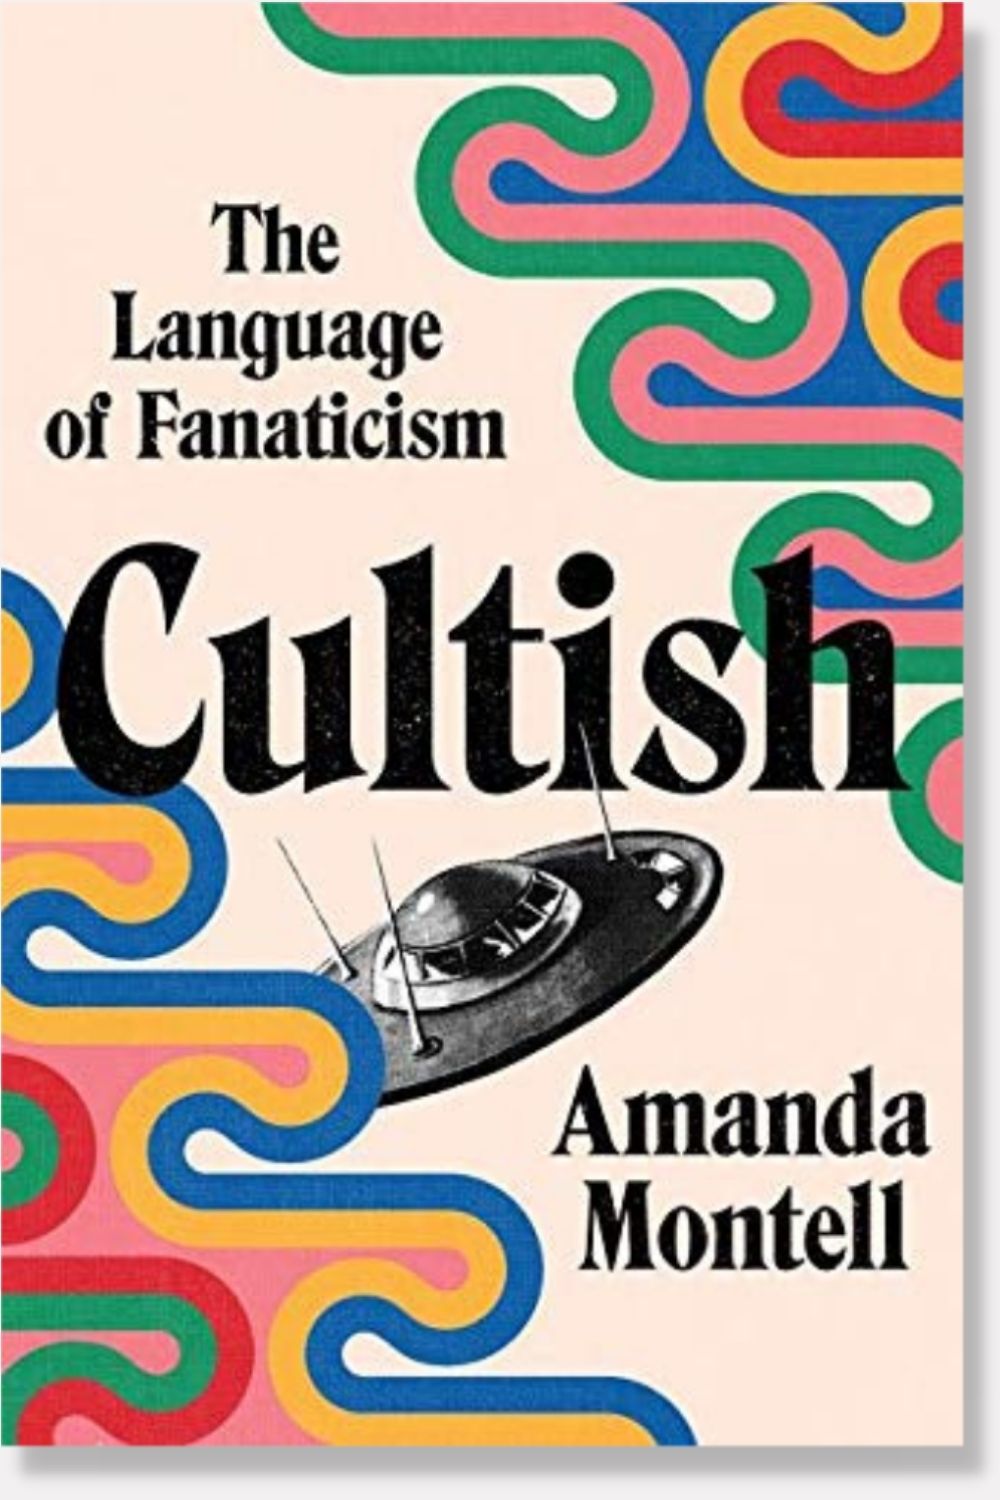 Cultish: The Language of Fanaticism by Amanda Montell - book cover